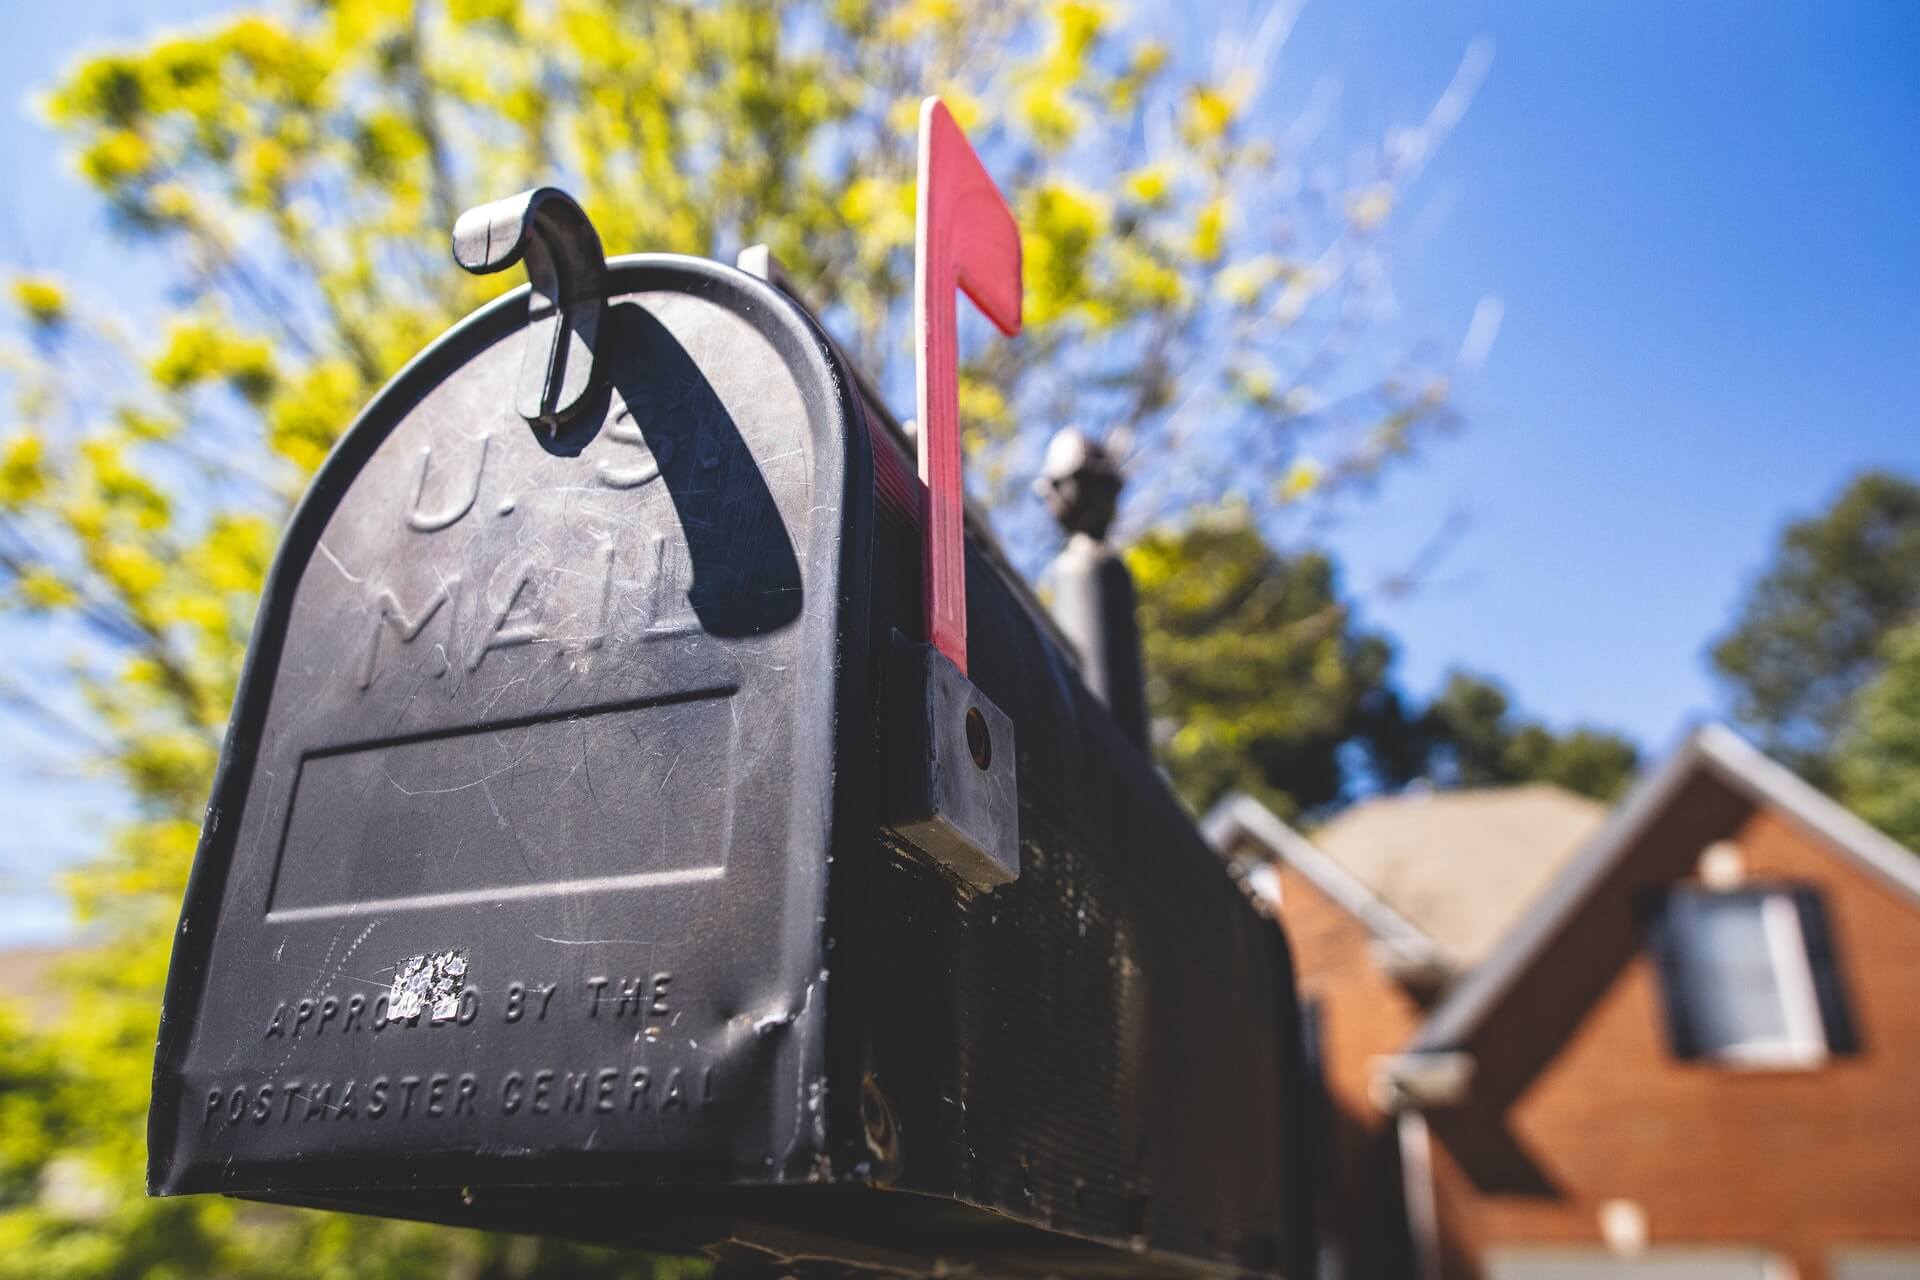 Forward your mail when you move